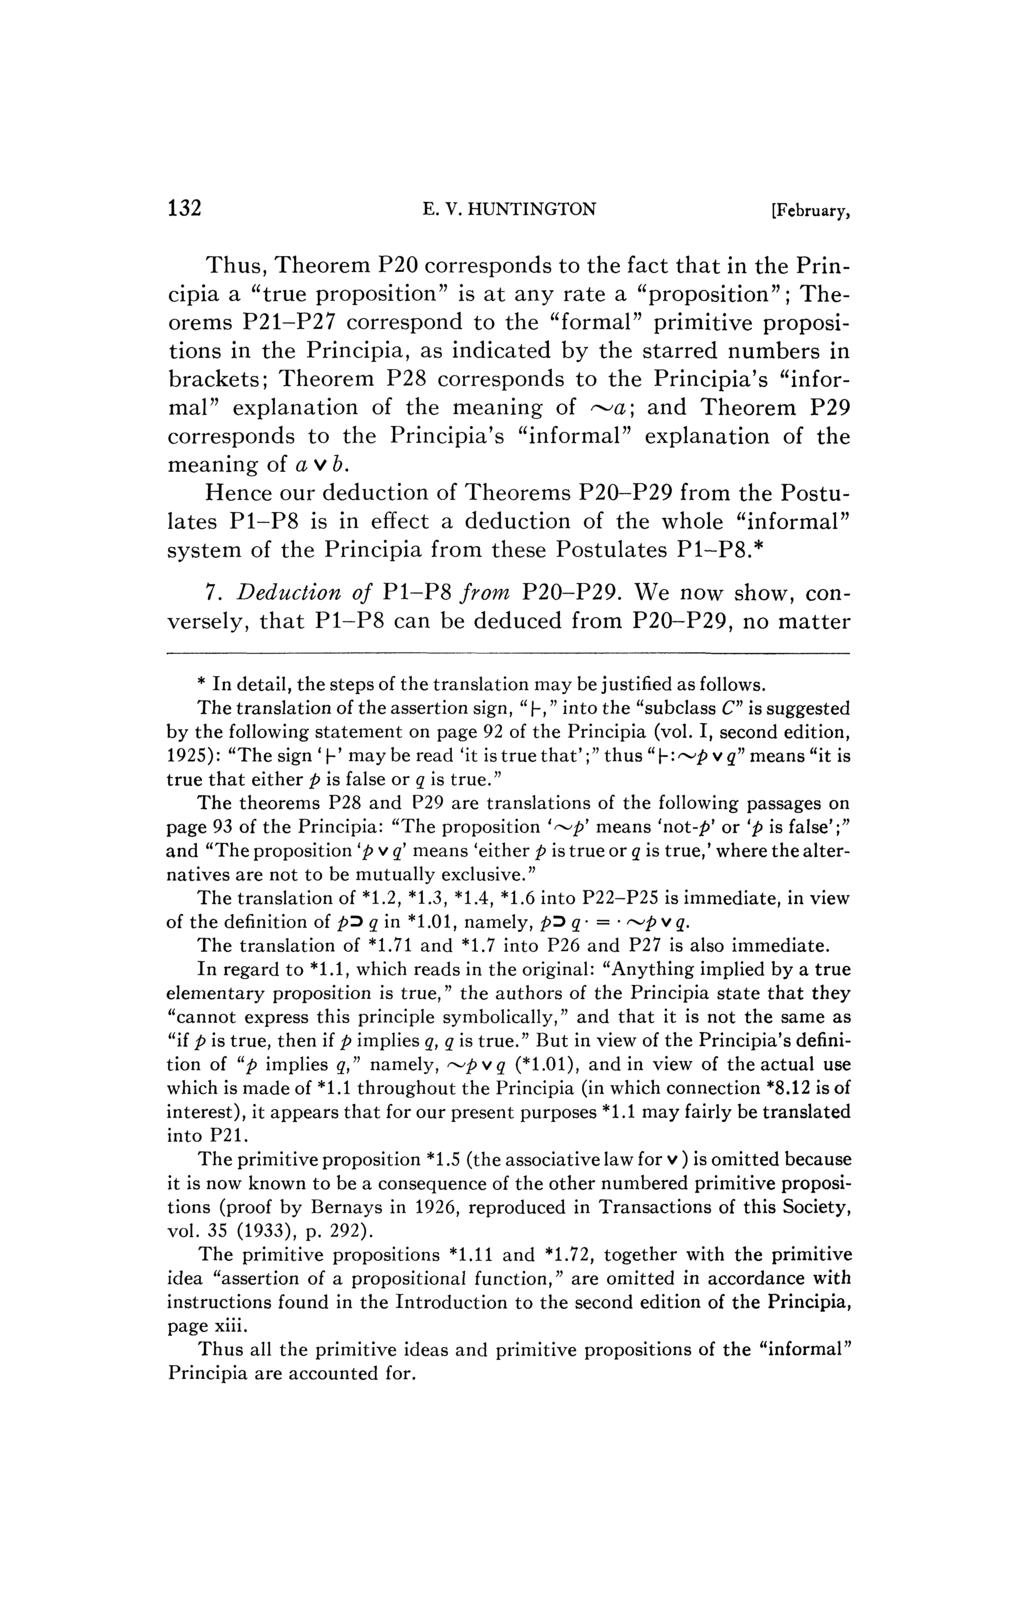 E. V. HUNTINGTON [February, Thus, Theorem P0 corresponds to the fact that in the Principia a "true proposition" is at any rate a "proposition"; Theorems P-P7 correspond to the "formal" primitive